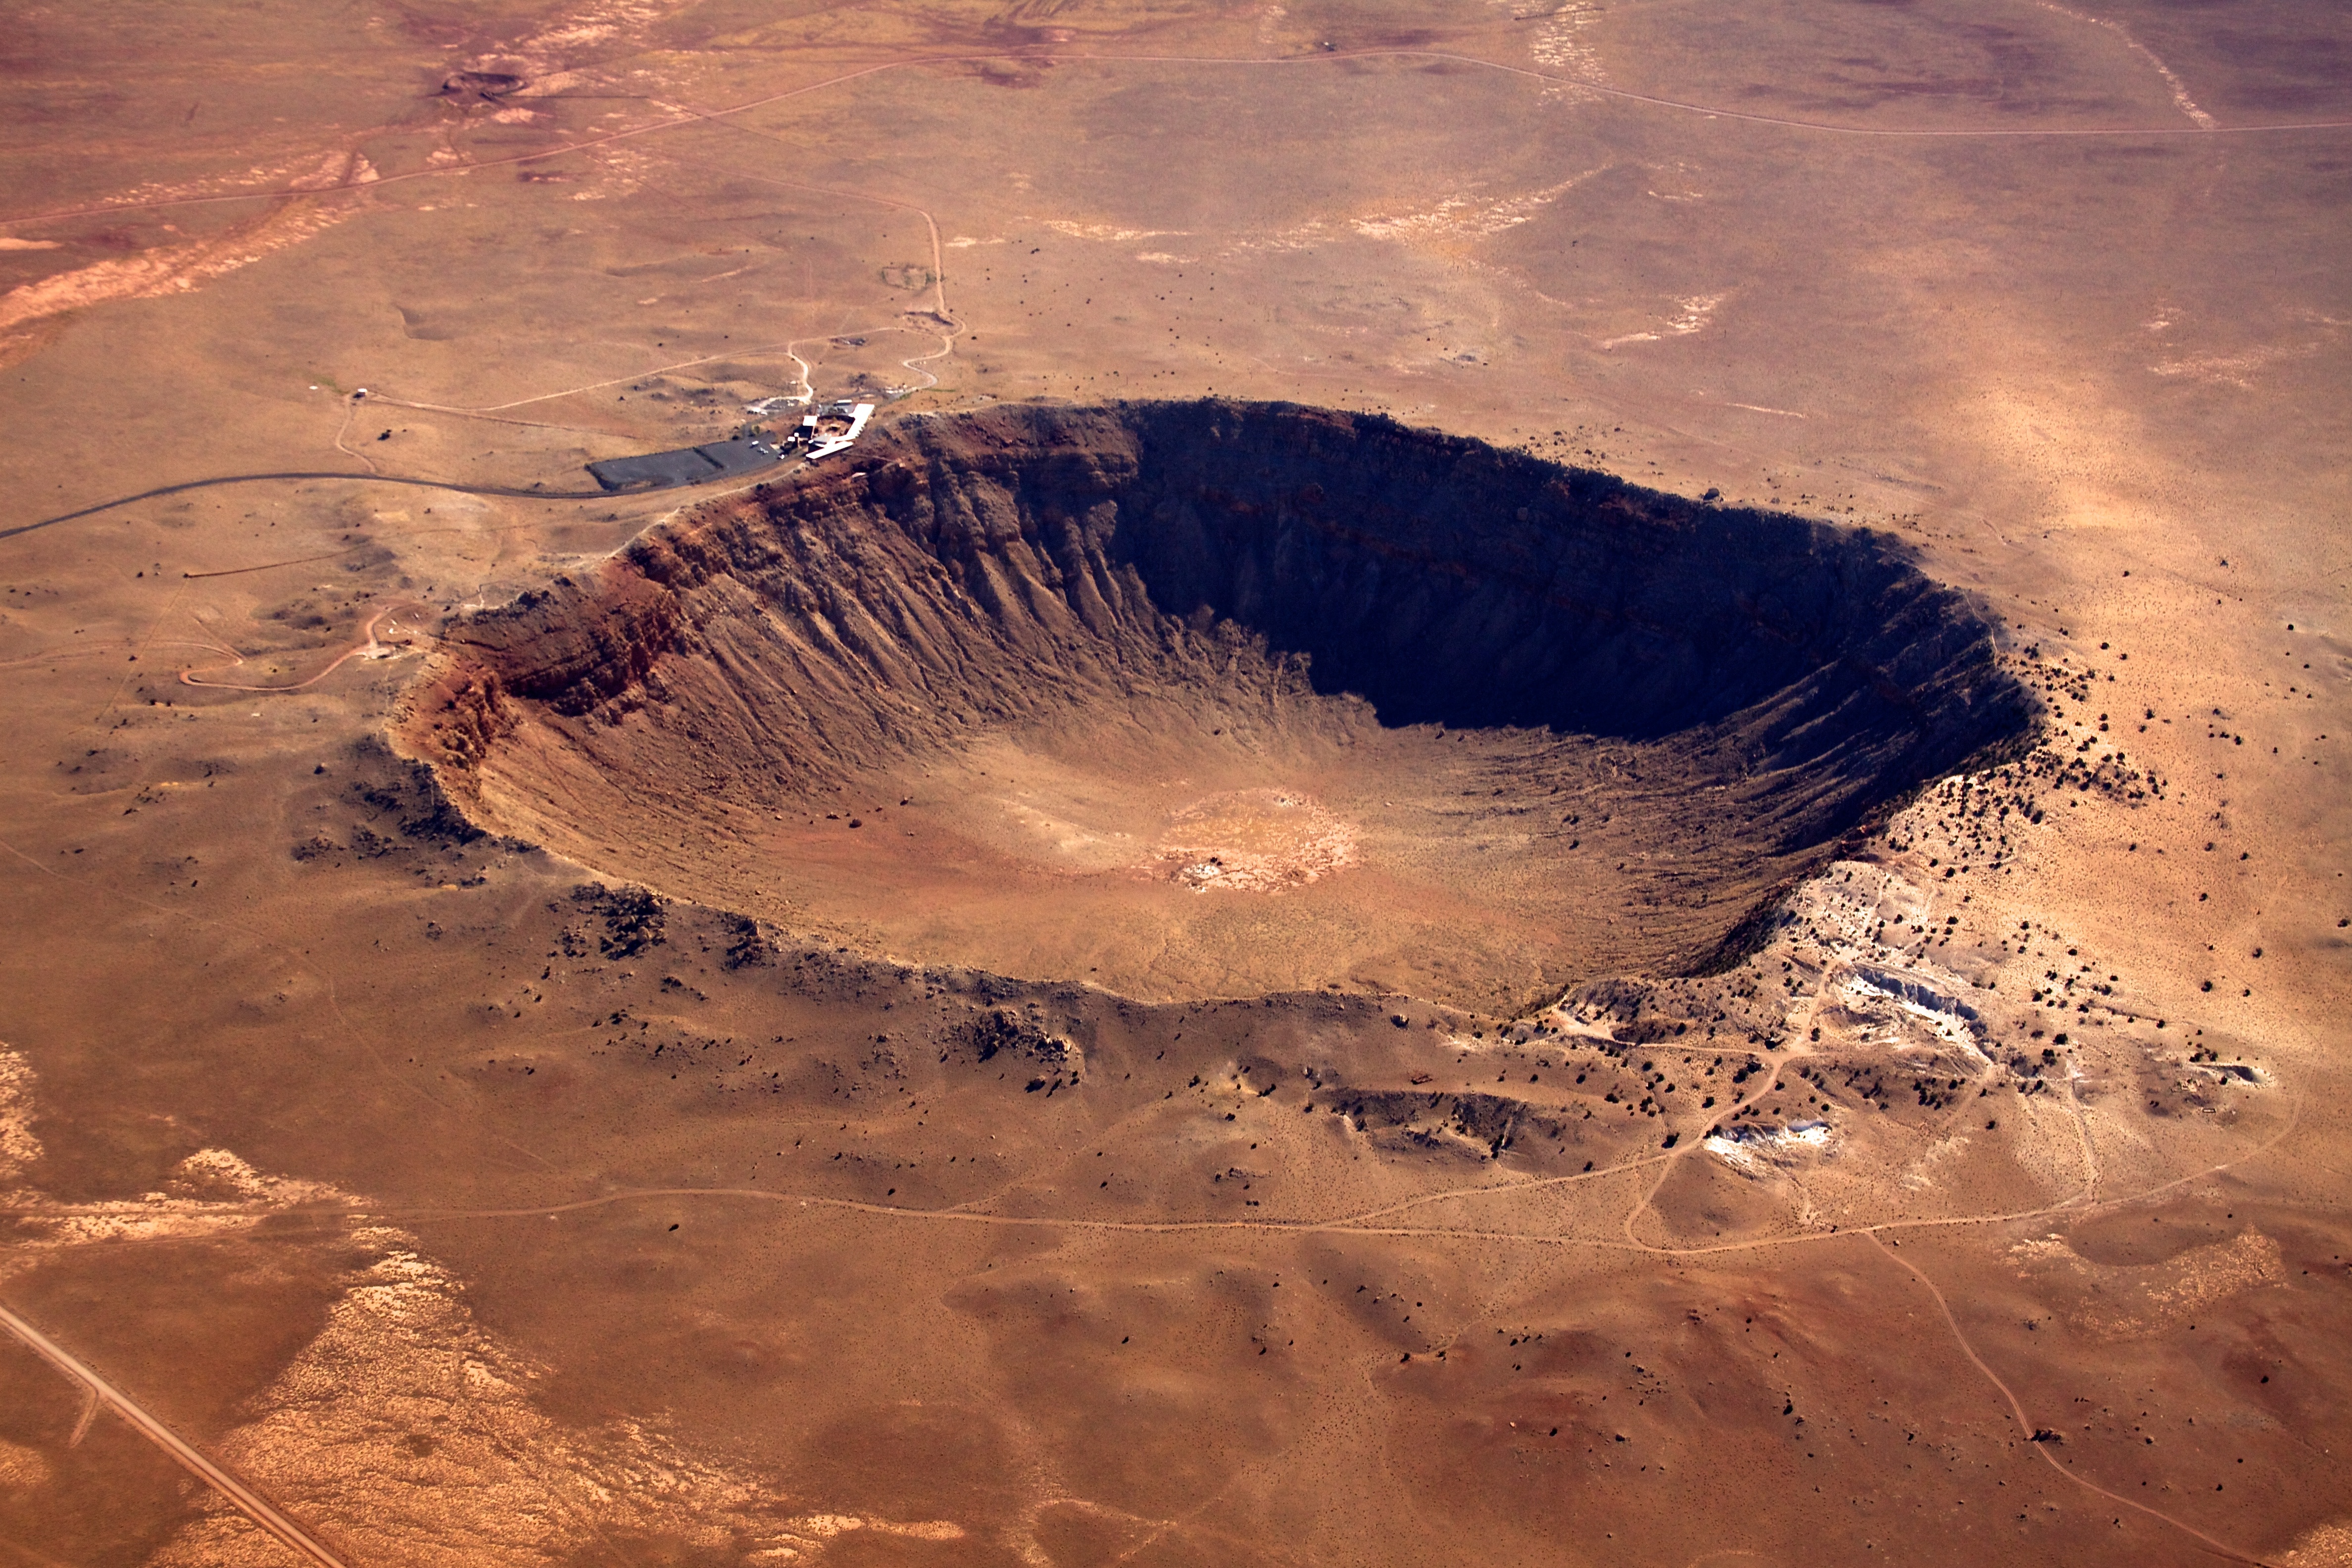 Arial shot of hole in the ground after a meteor strike